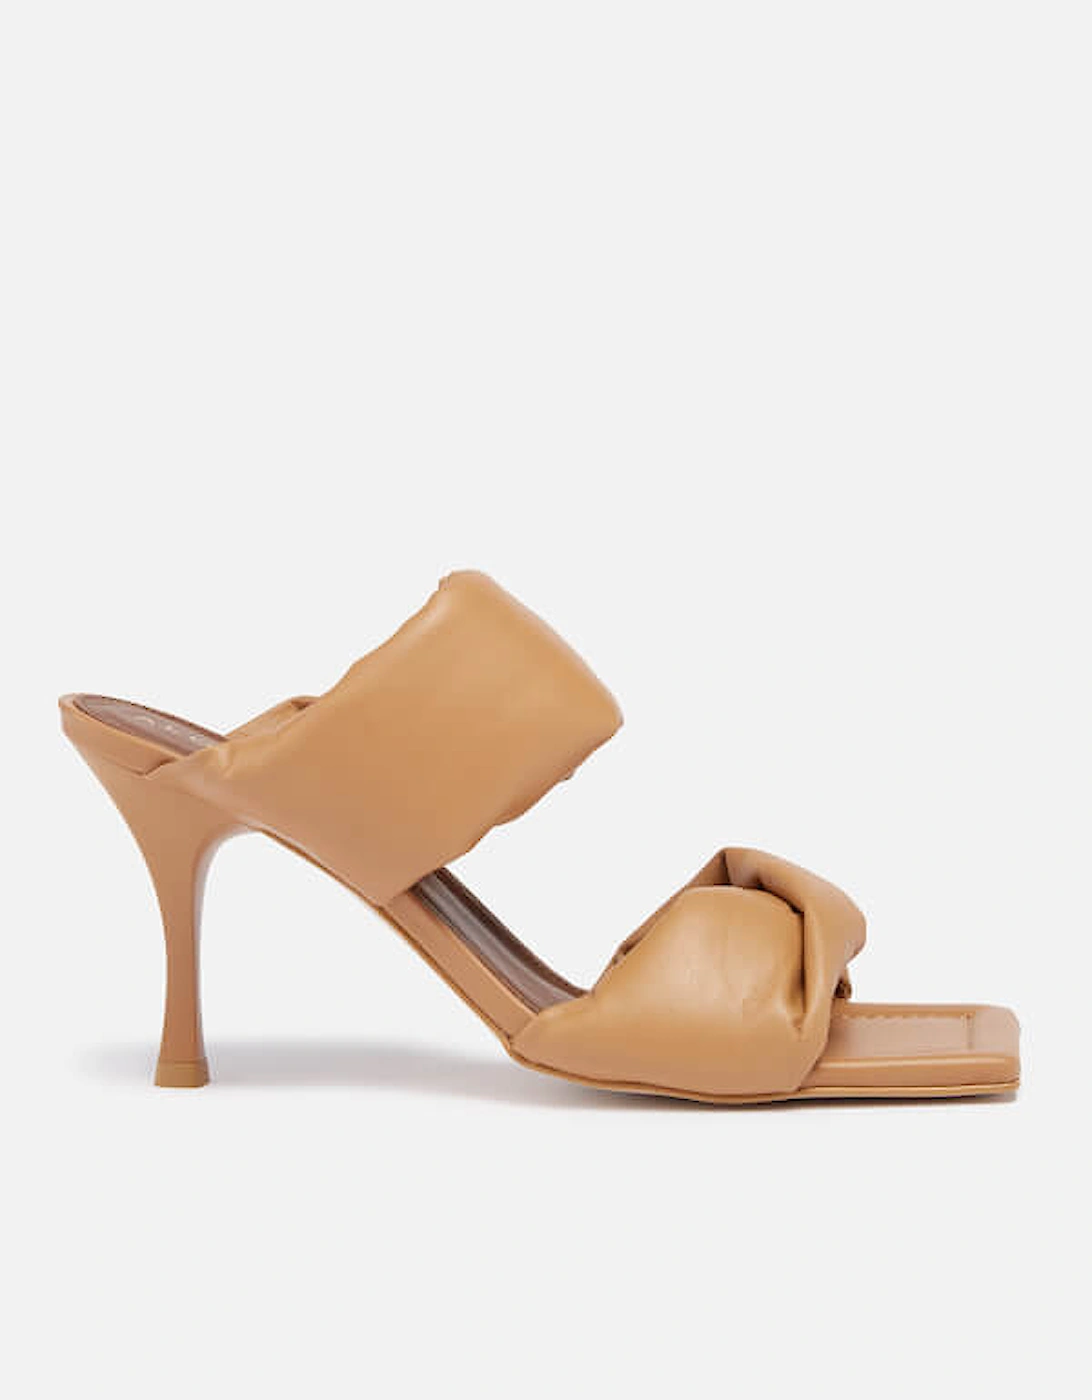 Women's Twist Leather Heeled Sandals - Camel - - Home - Women's Shoes - Women's High Heels - Women's Heeled Sandals - Women's Twist Leather Heeled Sandals - Camel, 3 of 2